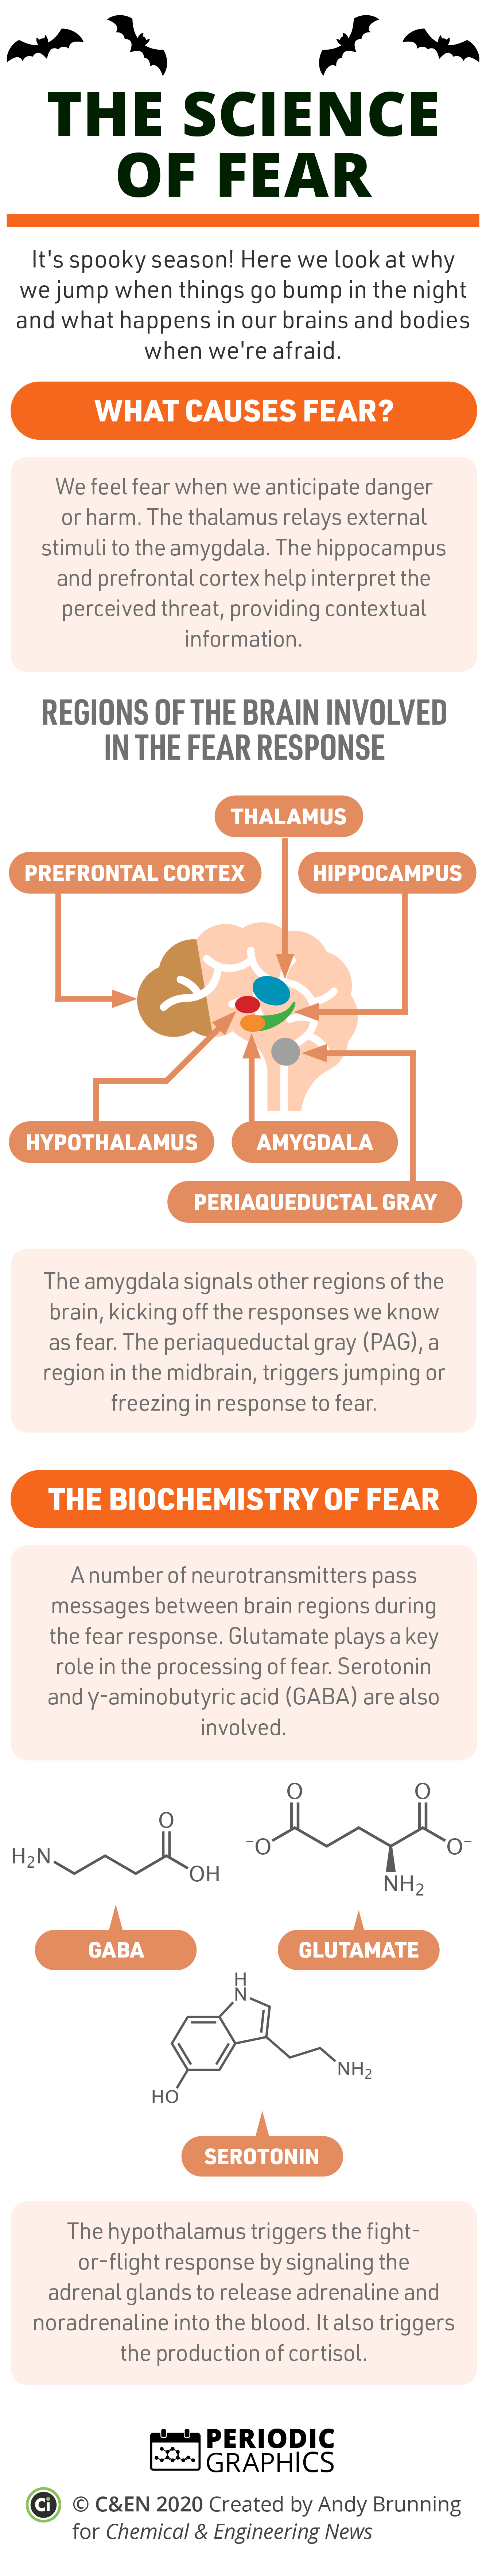 This is an image of a Periodic Graphic about fear.